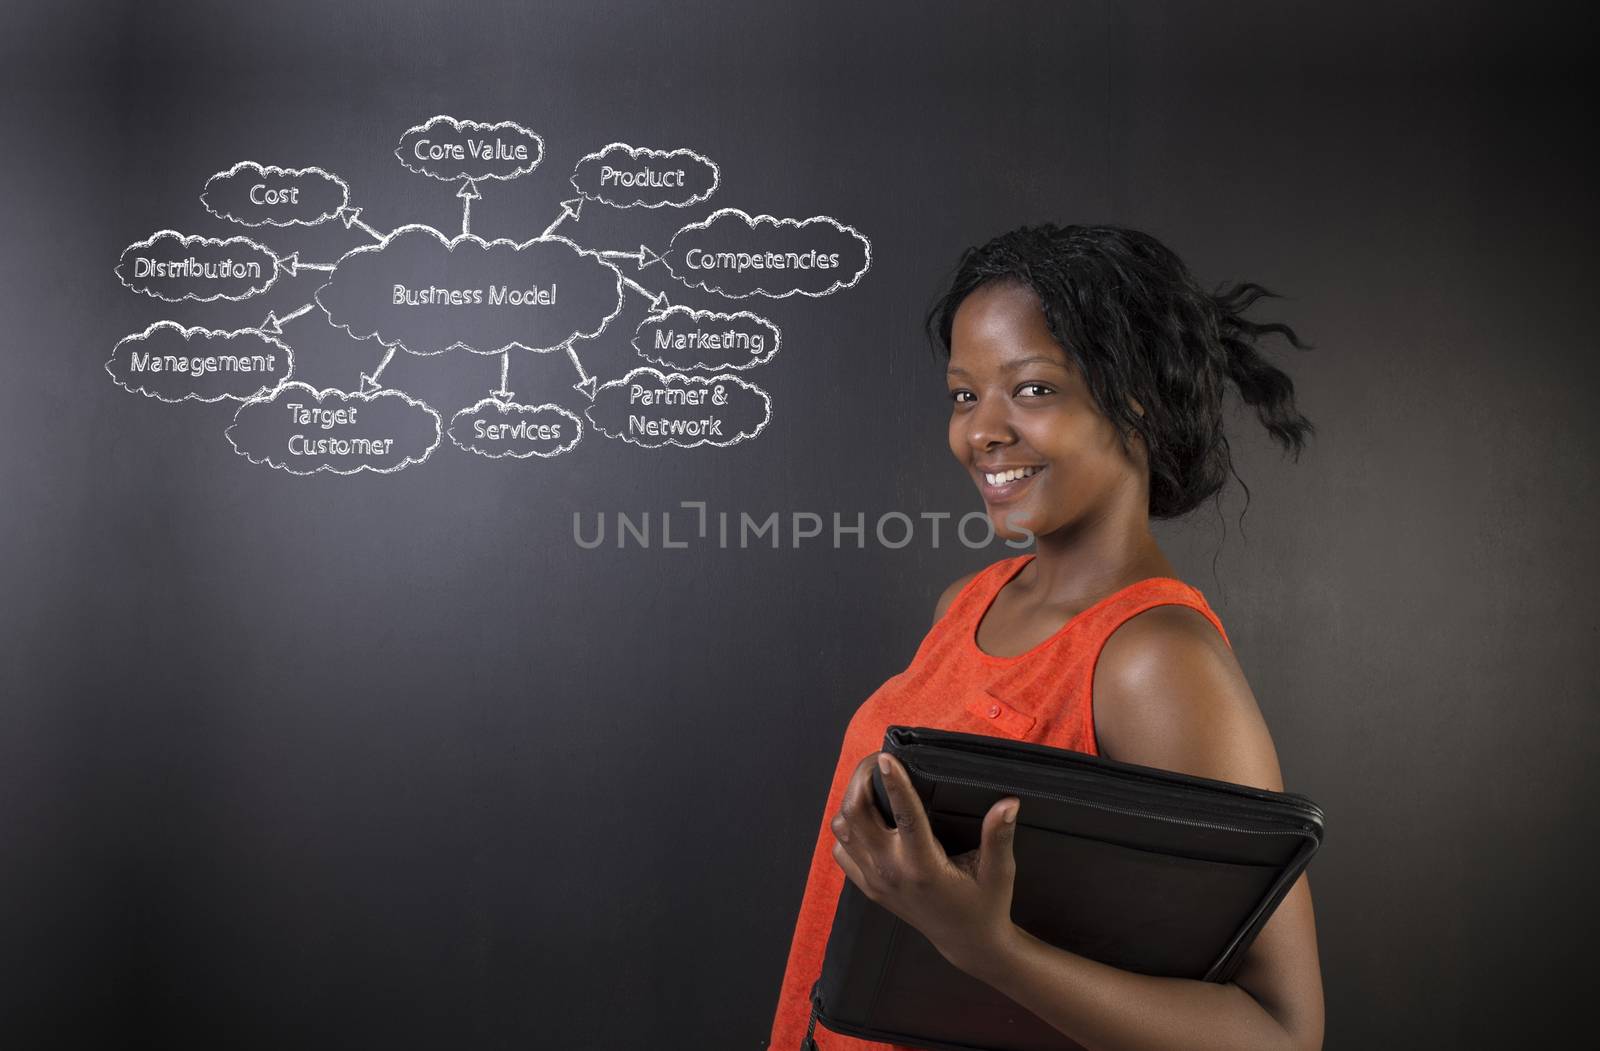 South African or African American woman teacher or student holding a diary against a blackboard background with a chalk business diagram